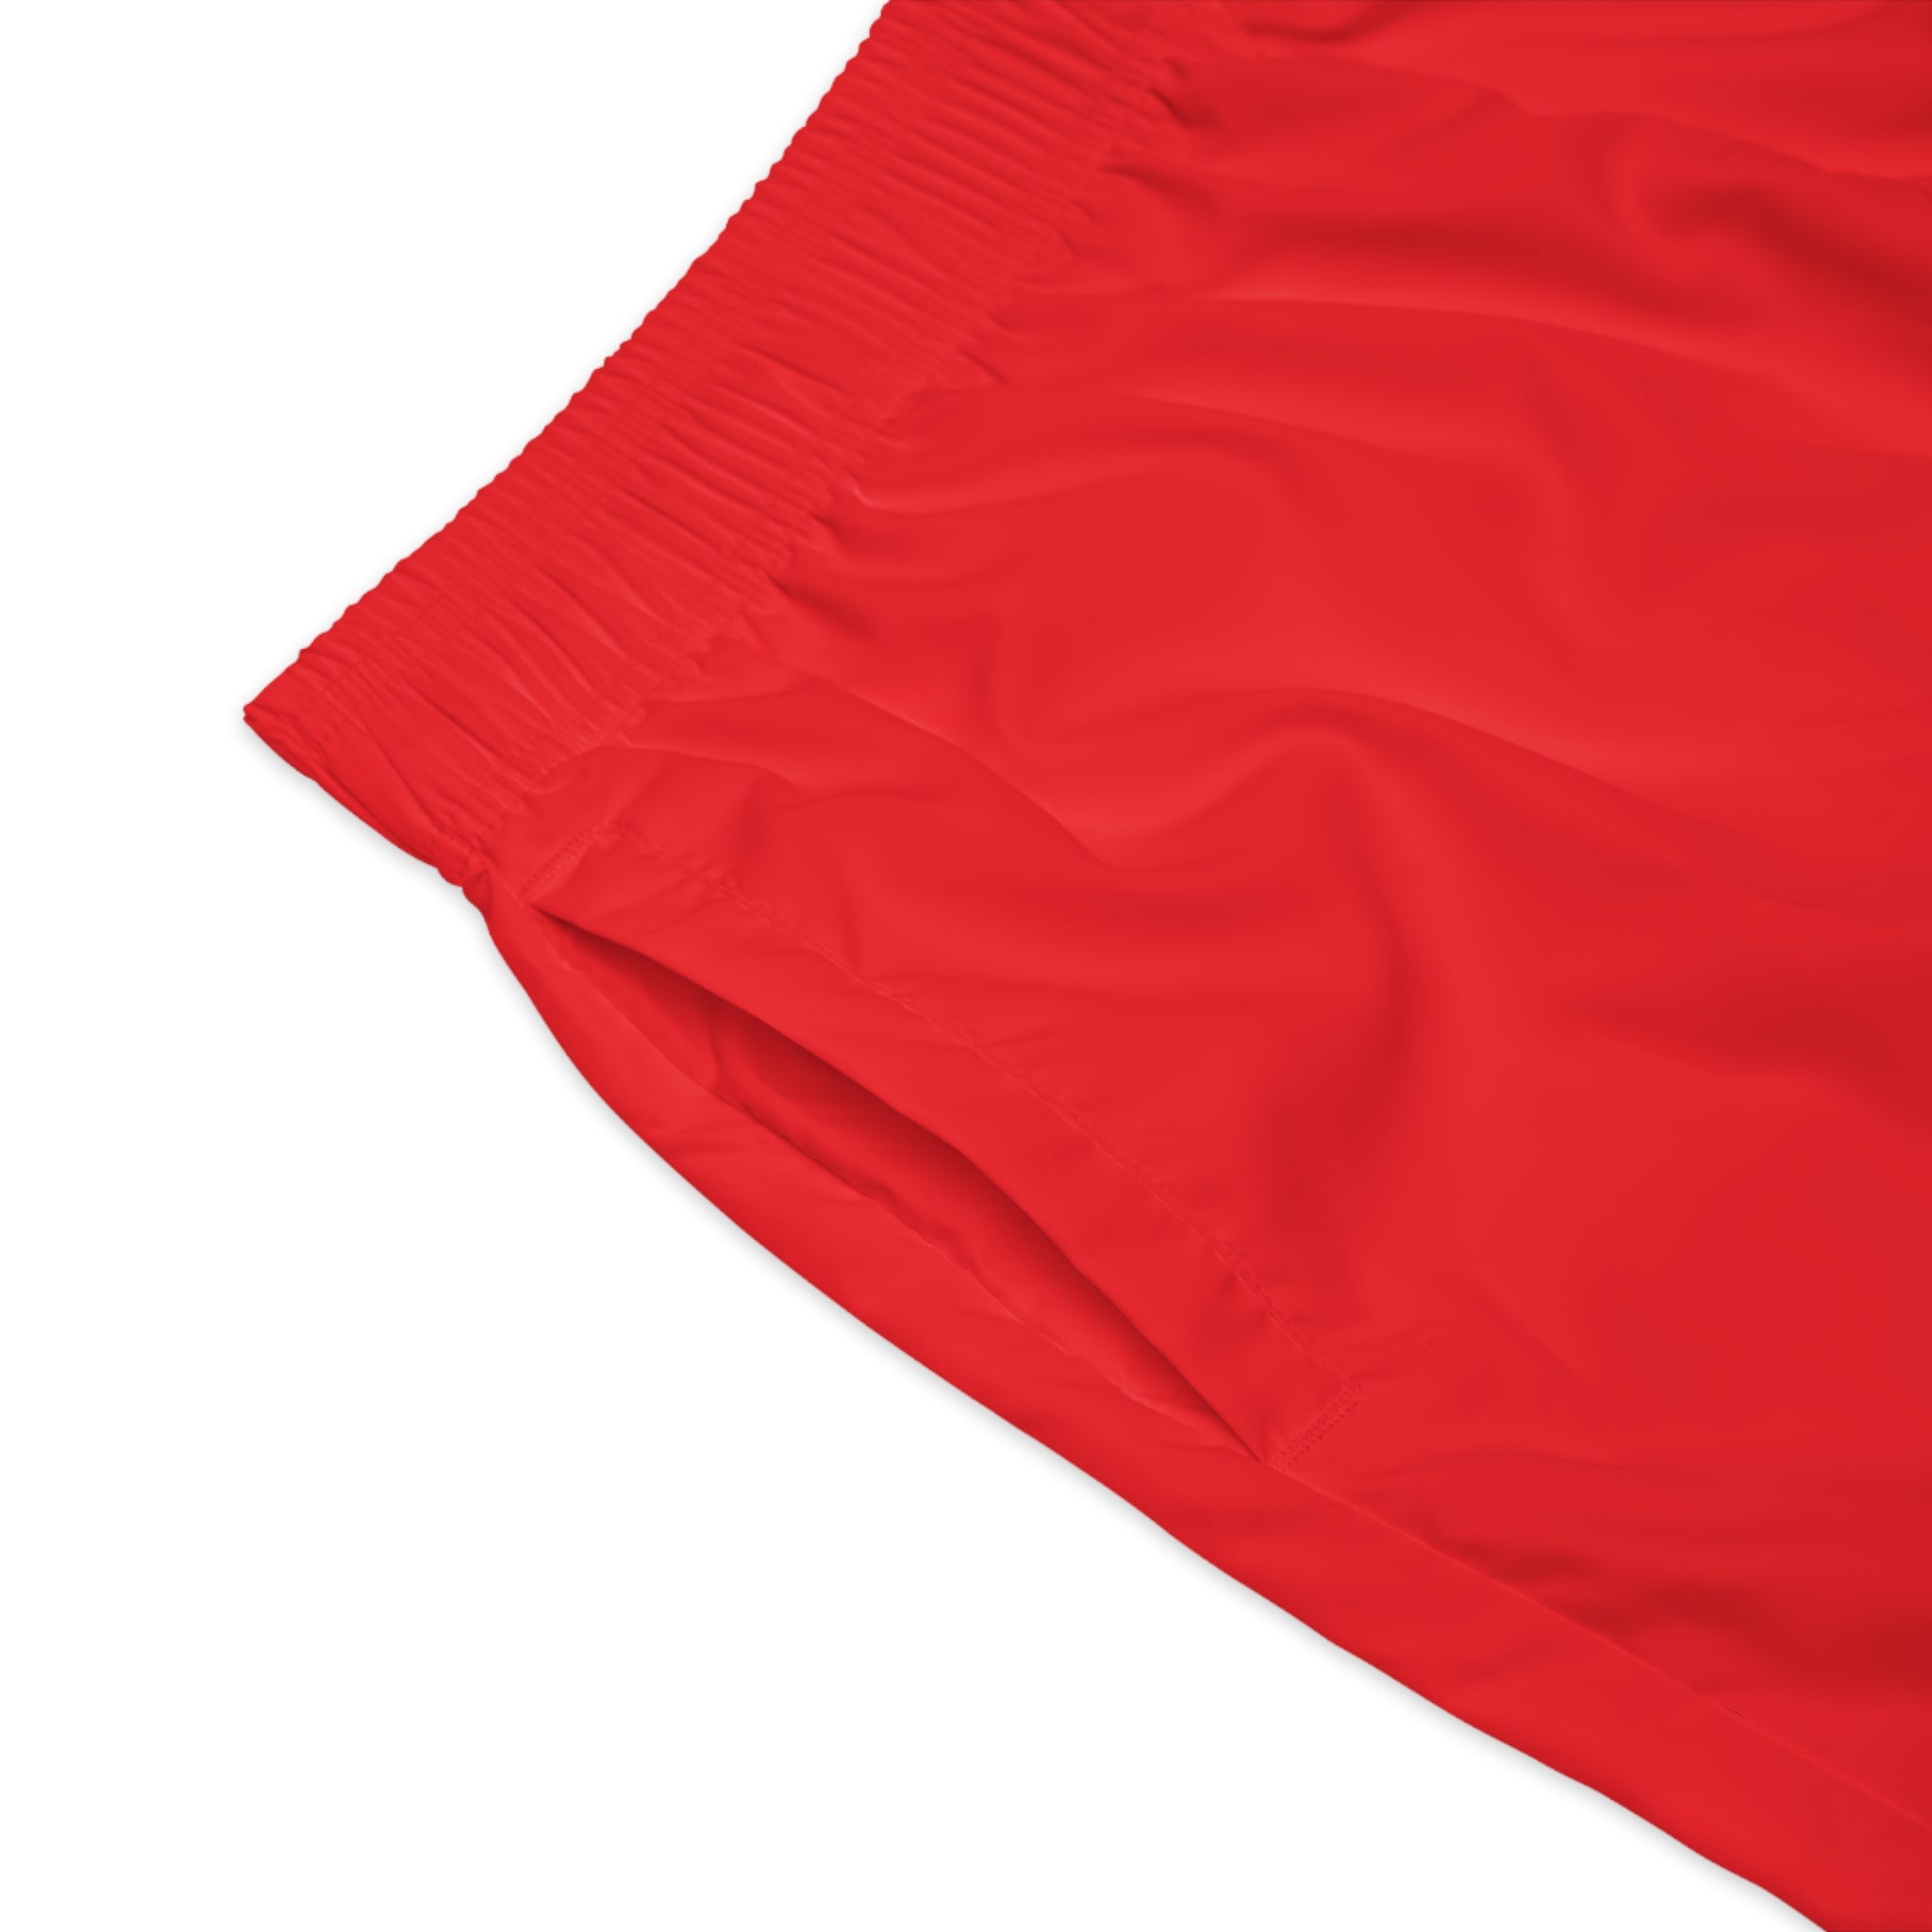 CombinedMinds Men's Jogger Shorts Red/White Logo